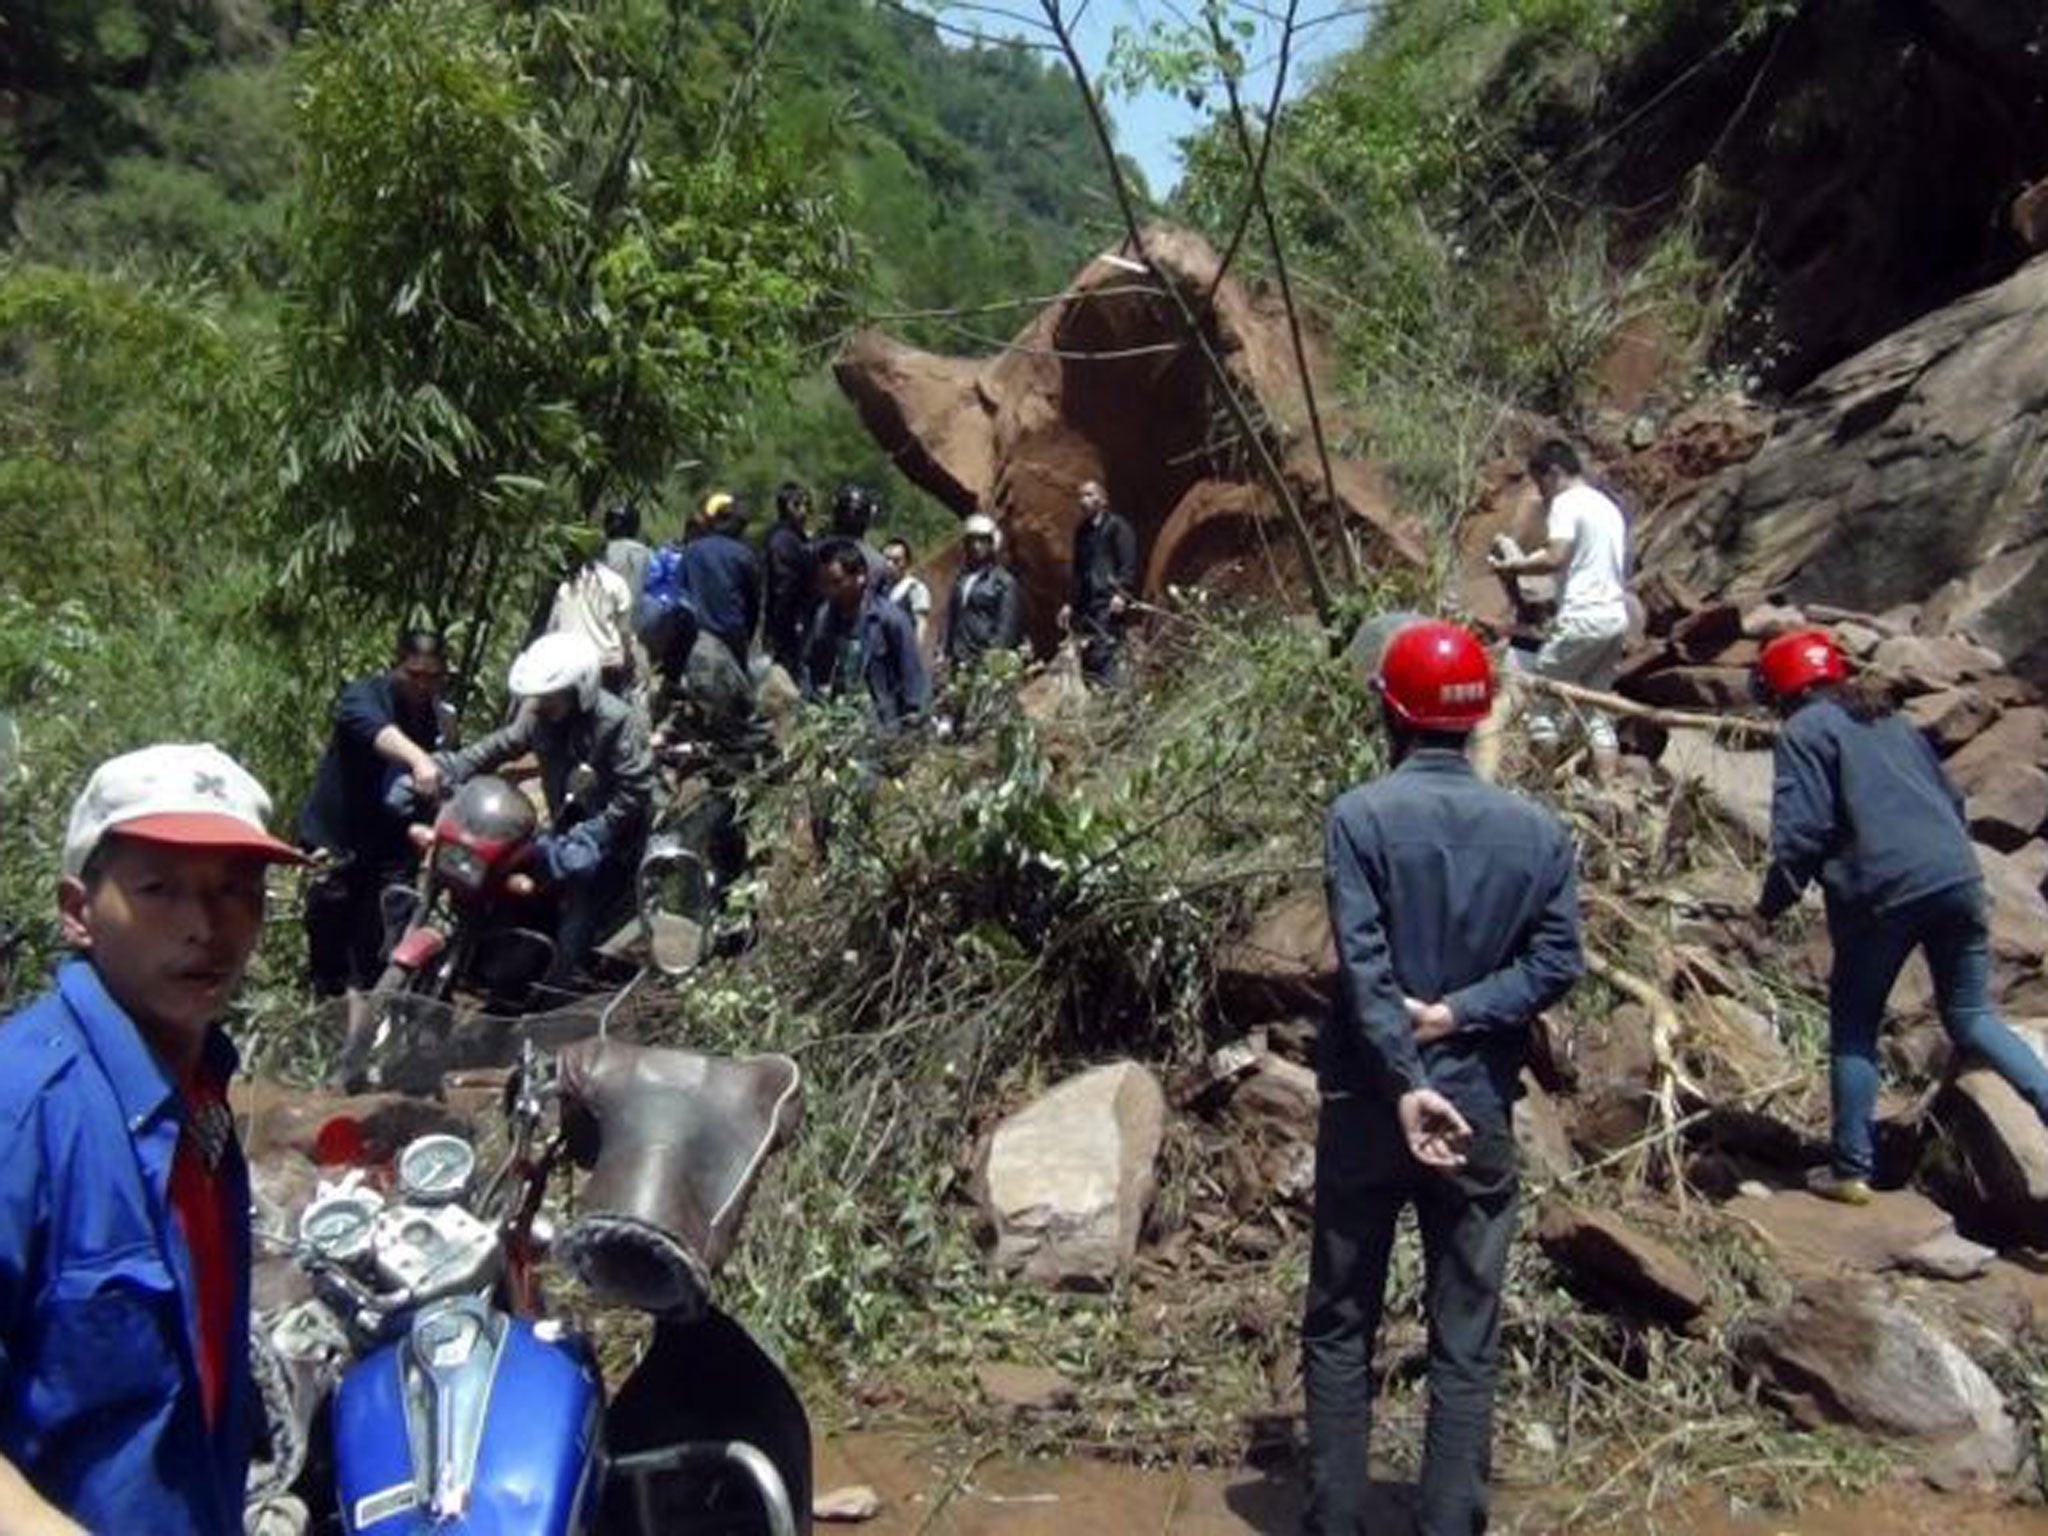 Rescuers try to remove rocks blocking a road after a strong earthquake of 6.6 magnitude hit Lushan county, Ya'an, Sichuan province